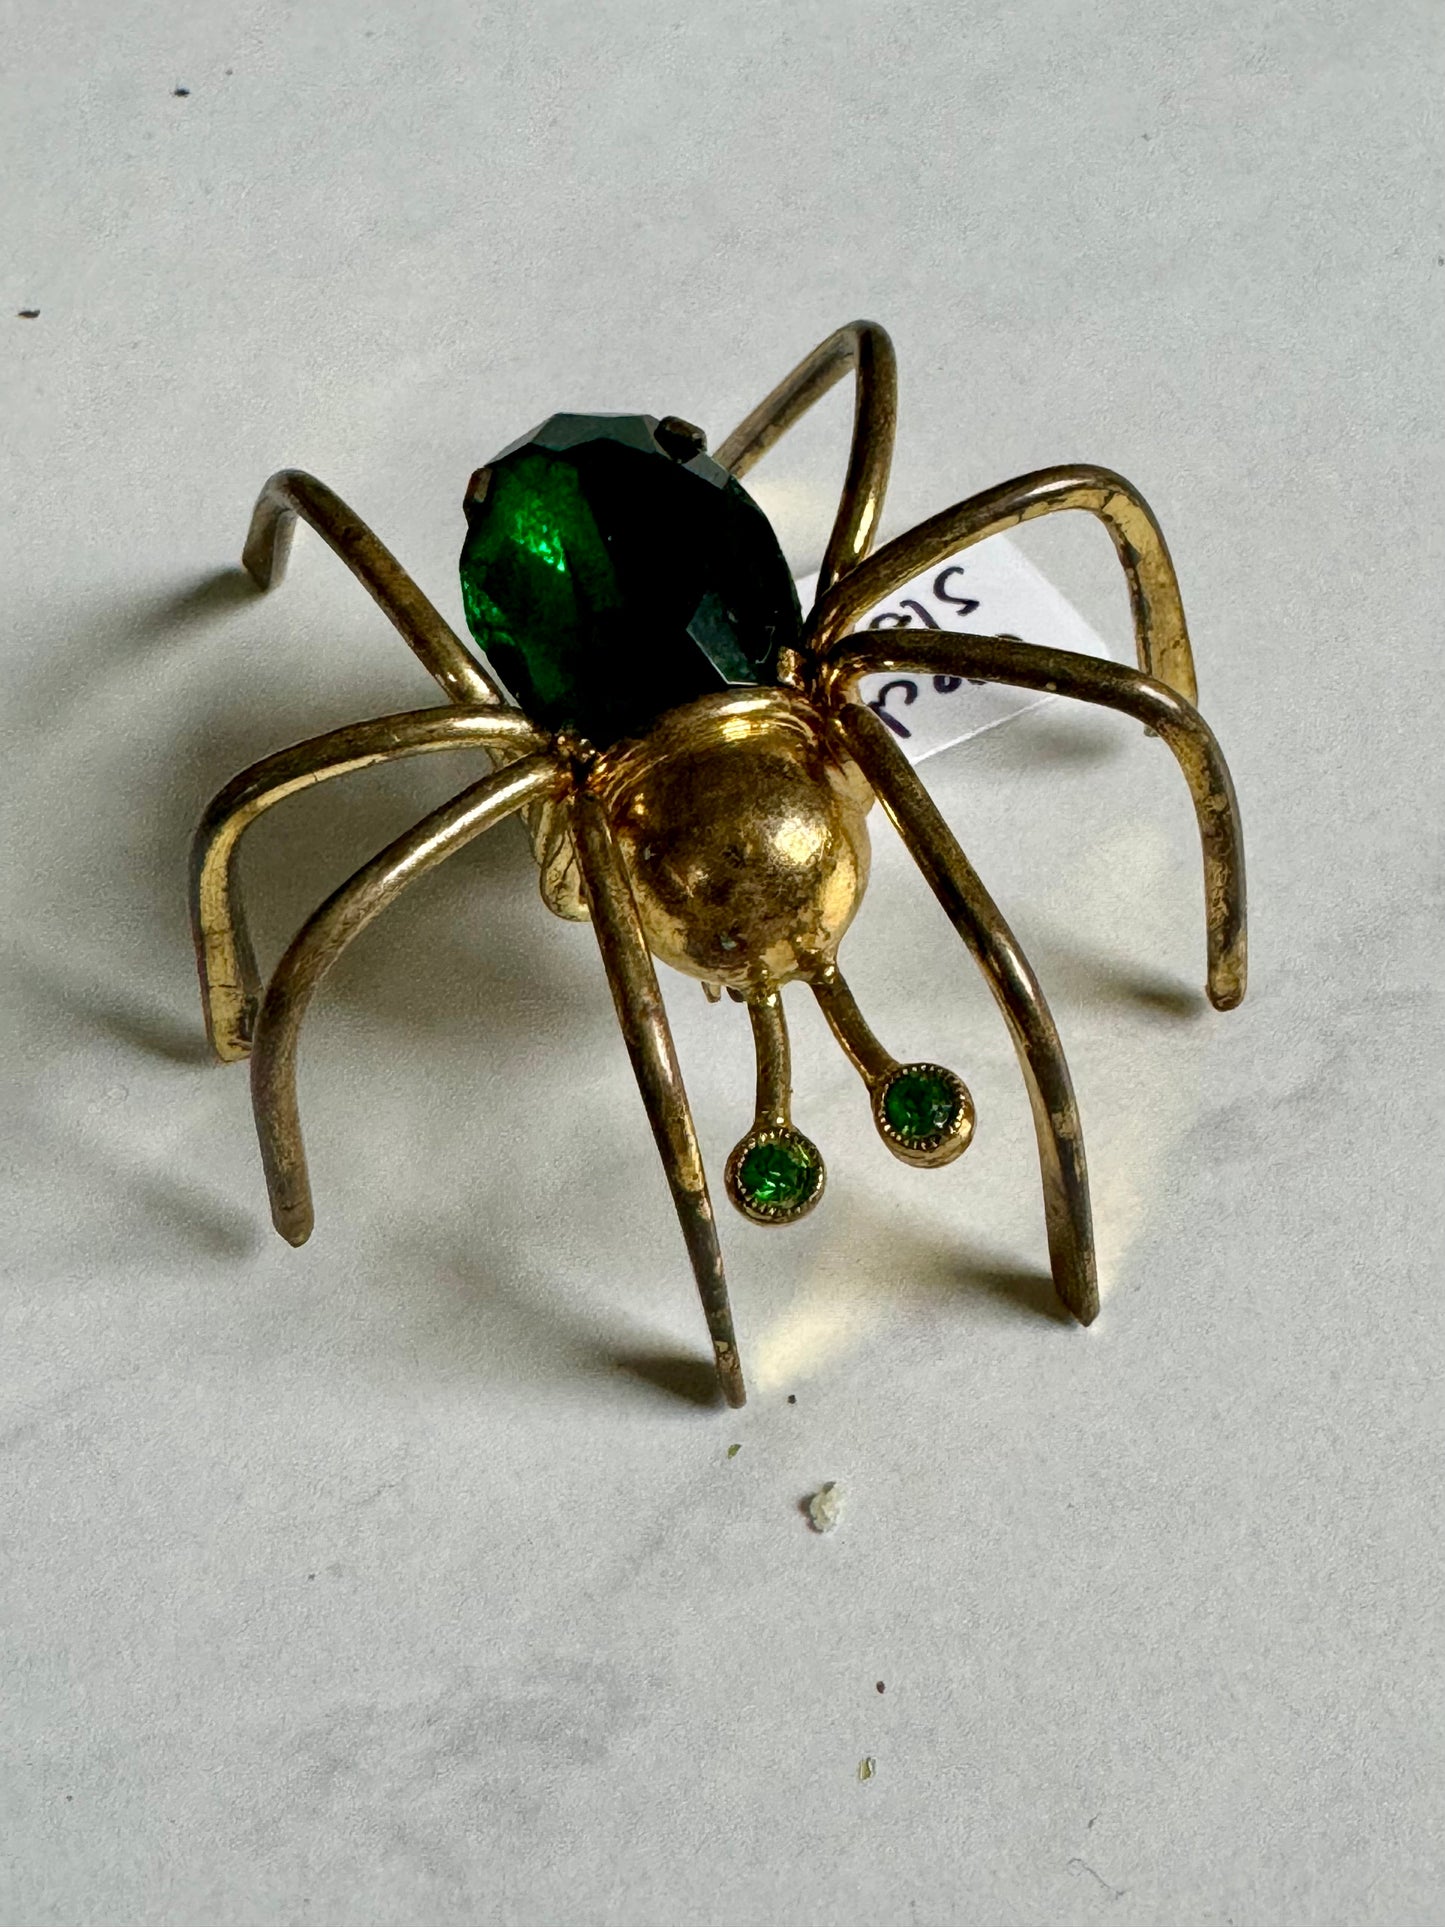 Little Miss Spider brooch made in Czechoslovakia with green rhinestone body and eye and long raised legs